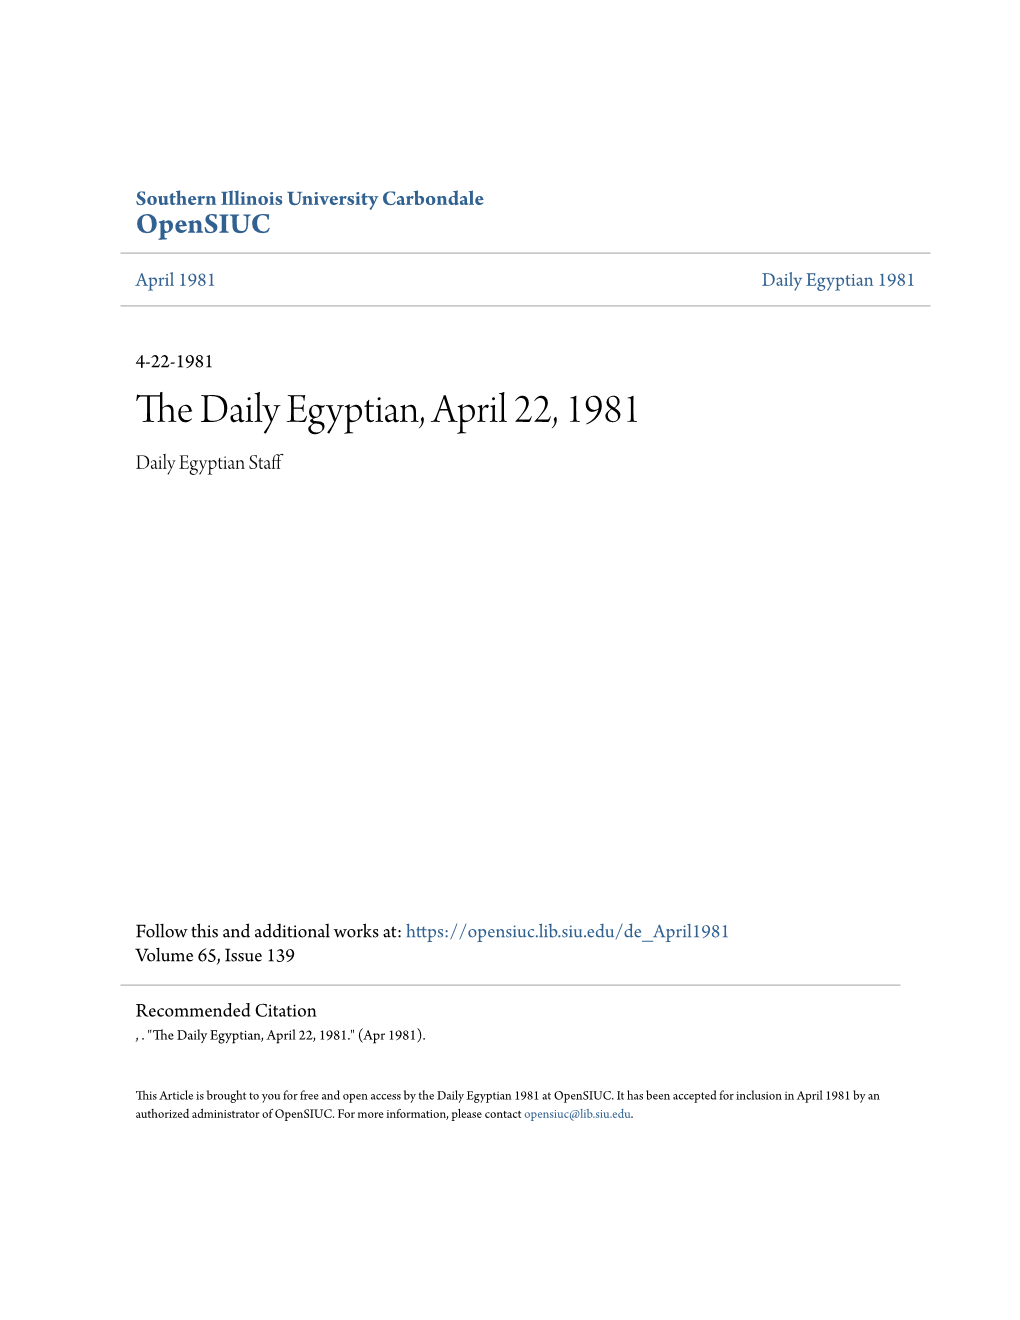 The Daily Egyptian, April 22, 1981